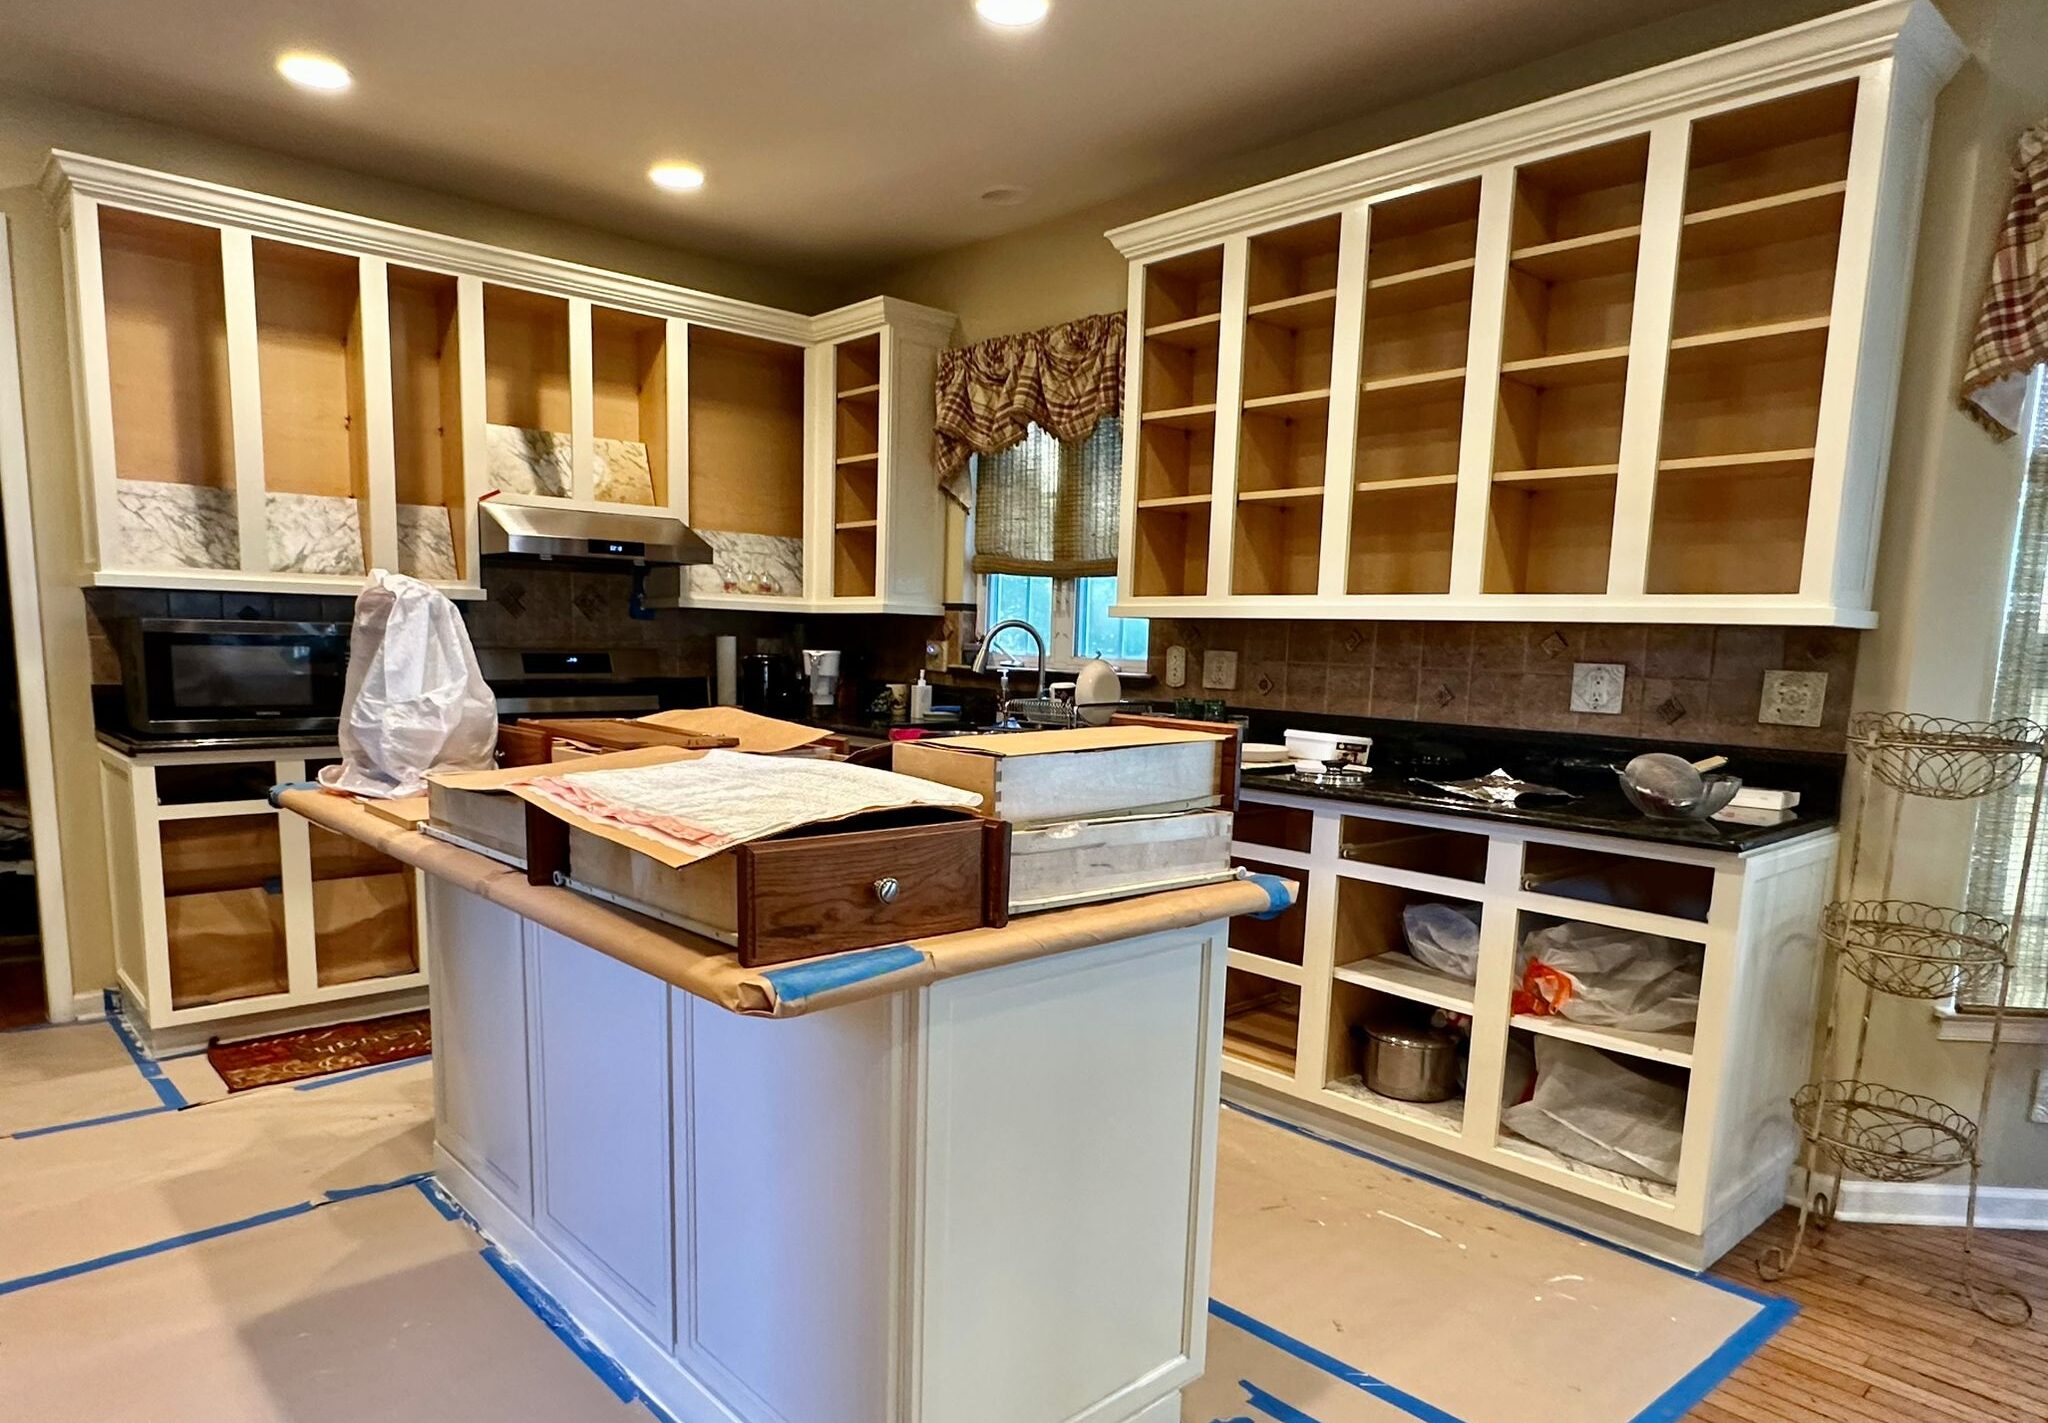 A kitchen with white cabinets under renovation by Clarke's professional.